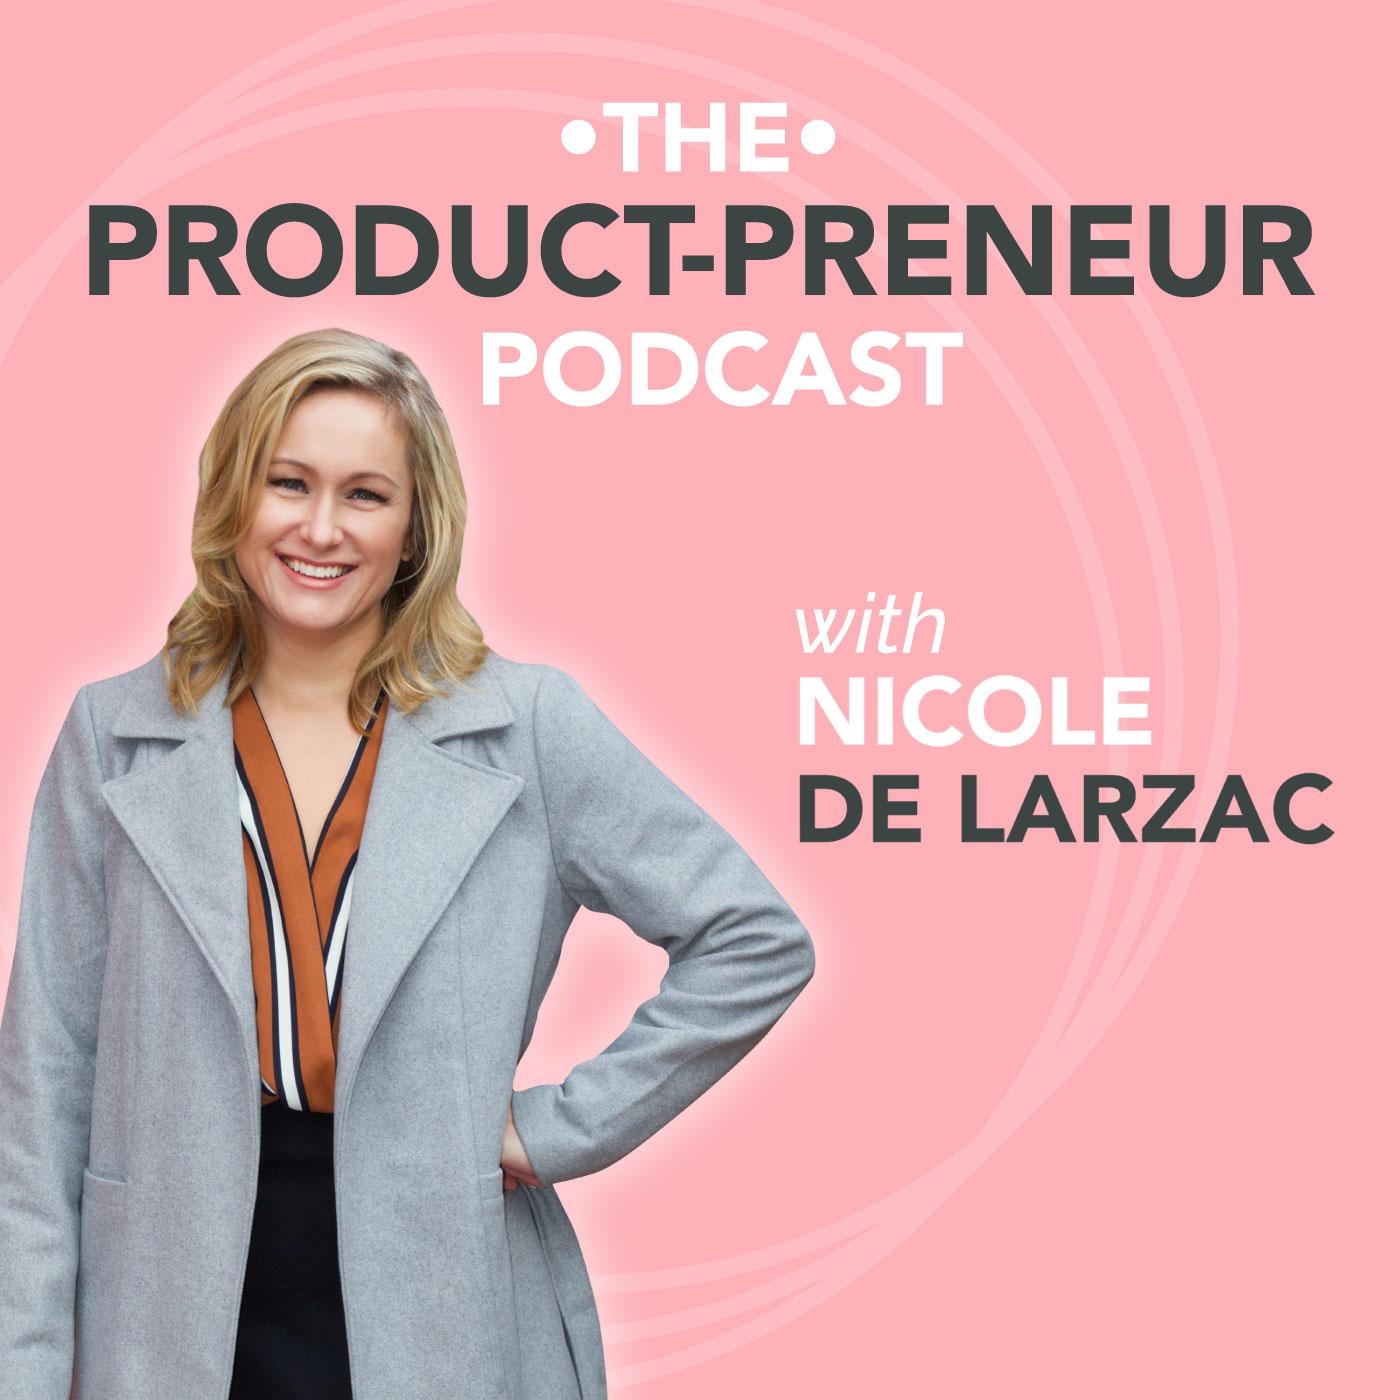 The Product-preneur Podcast with Nicole De Larzac